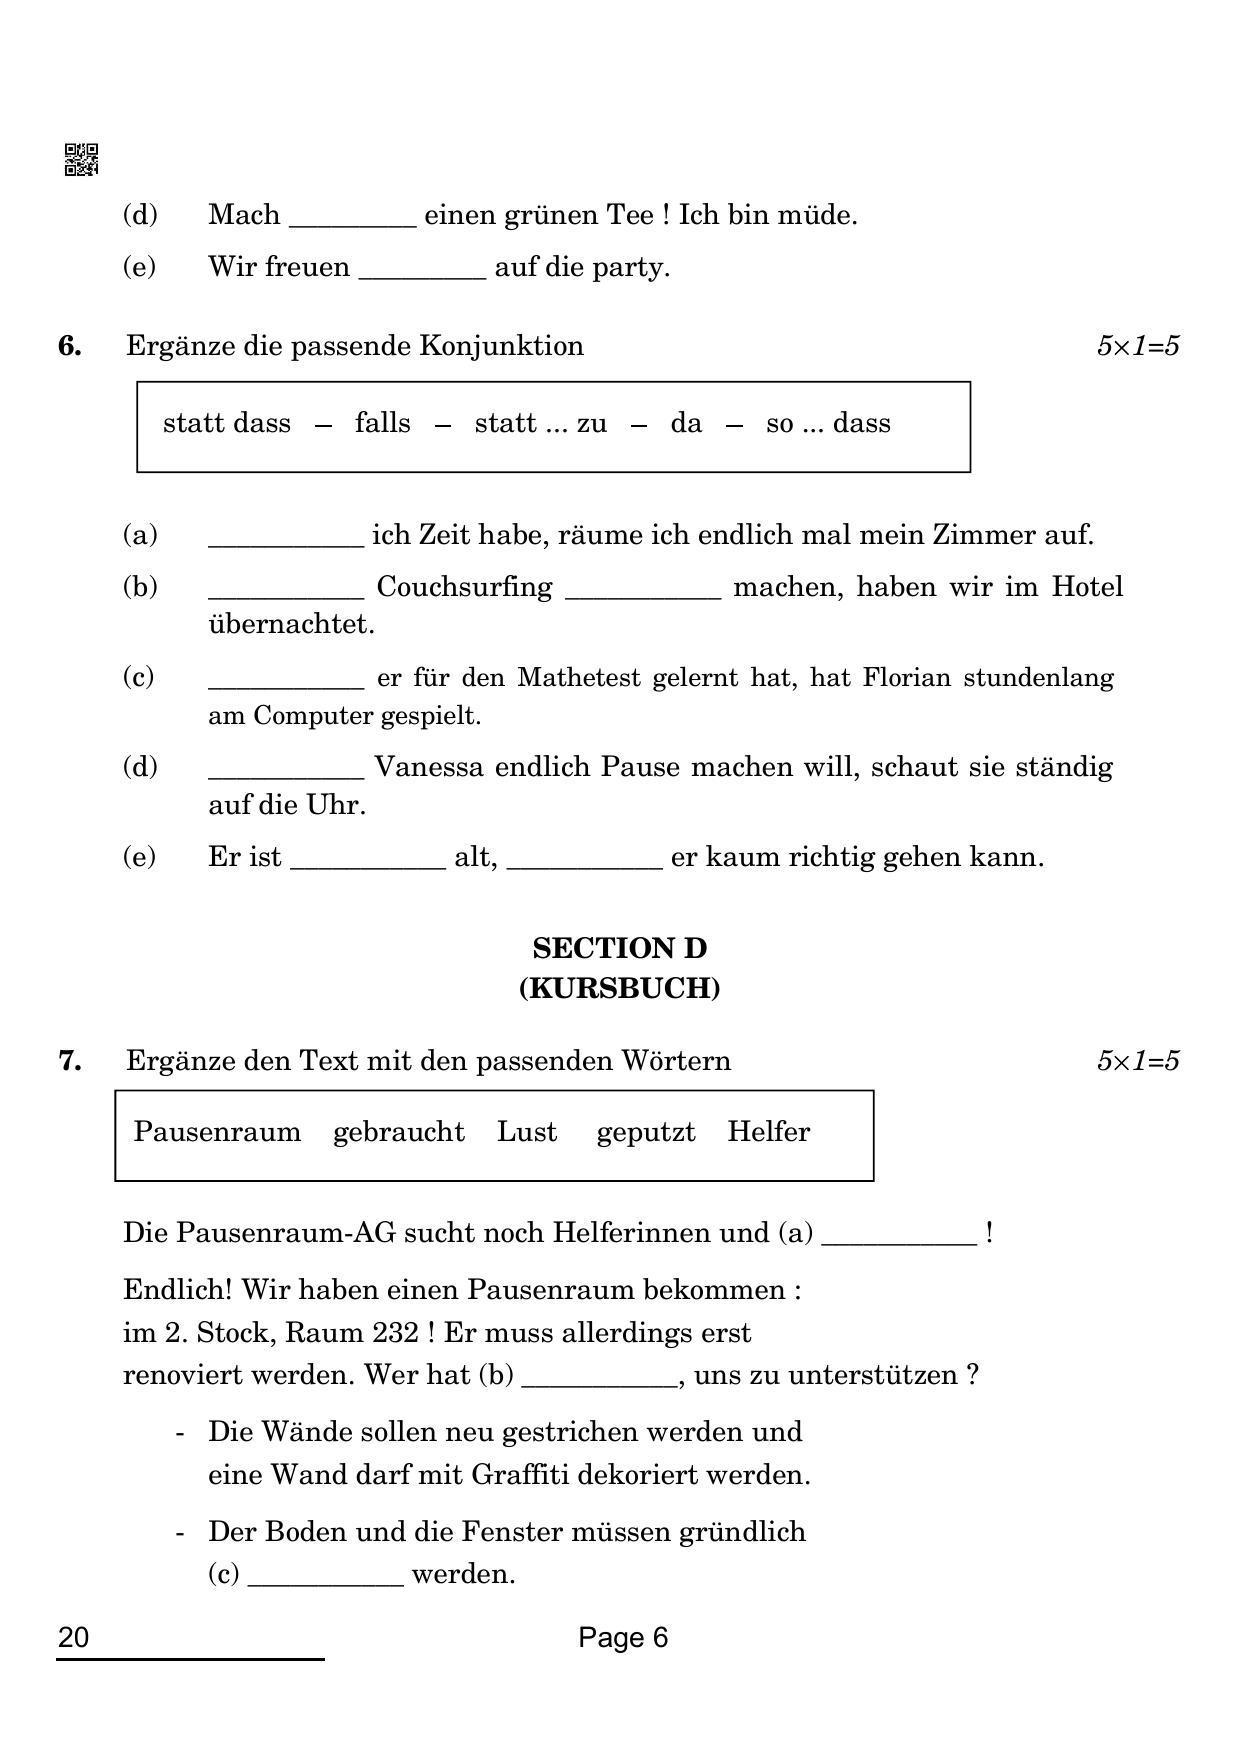 CBSE Class 12 20_German 2022 Question Paper - Page 6